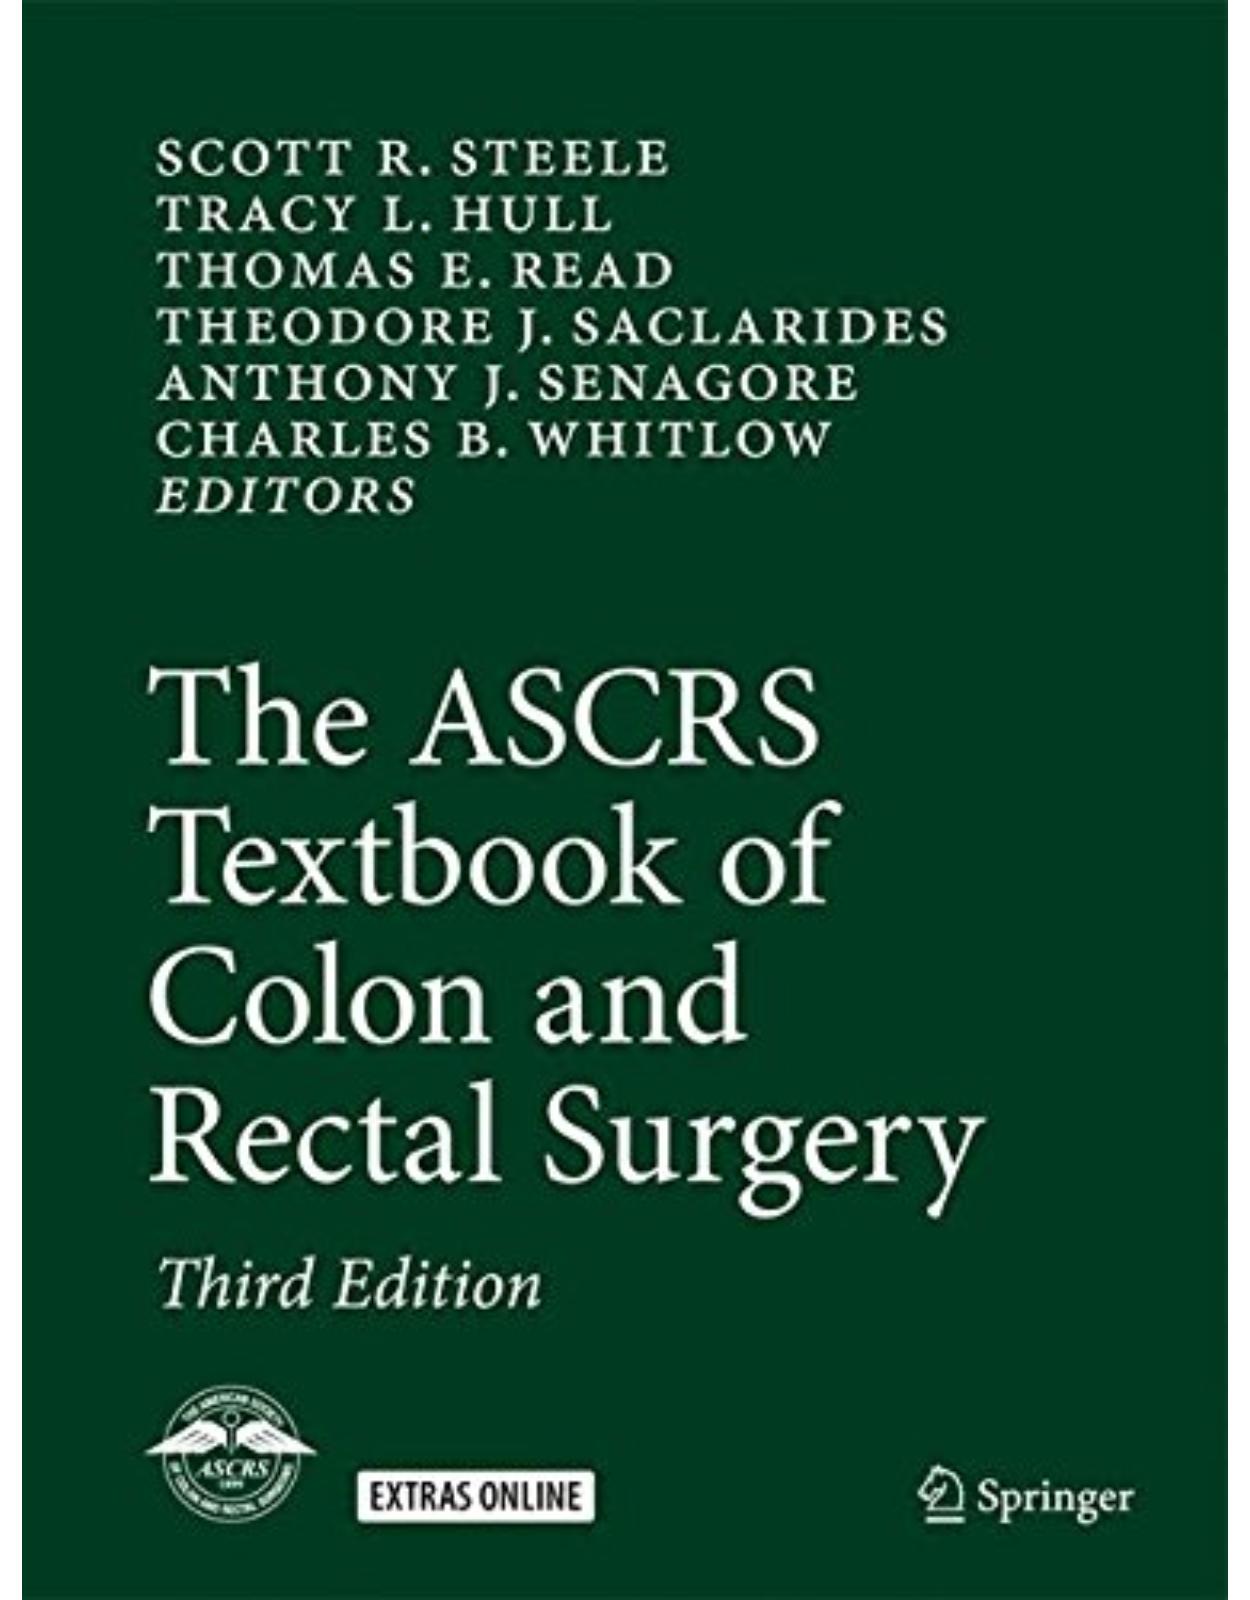 The ASCRS Textbook of Colon and Rectal Surgery 